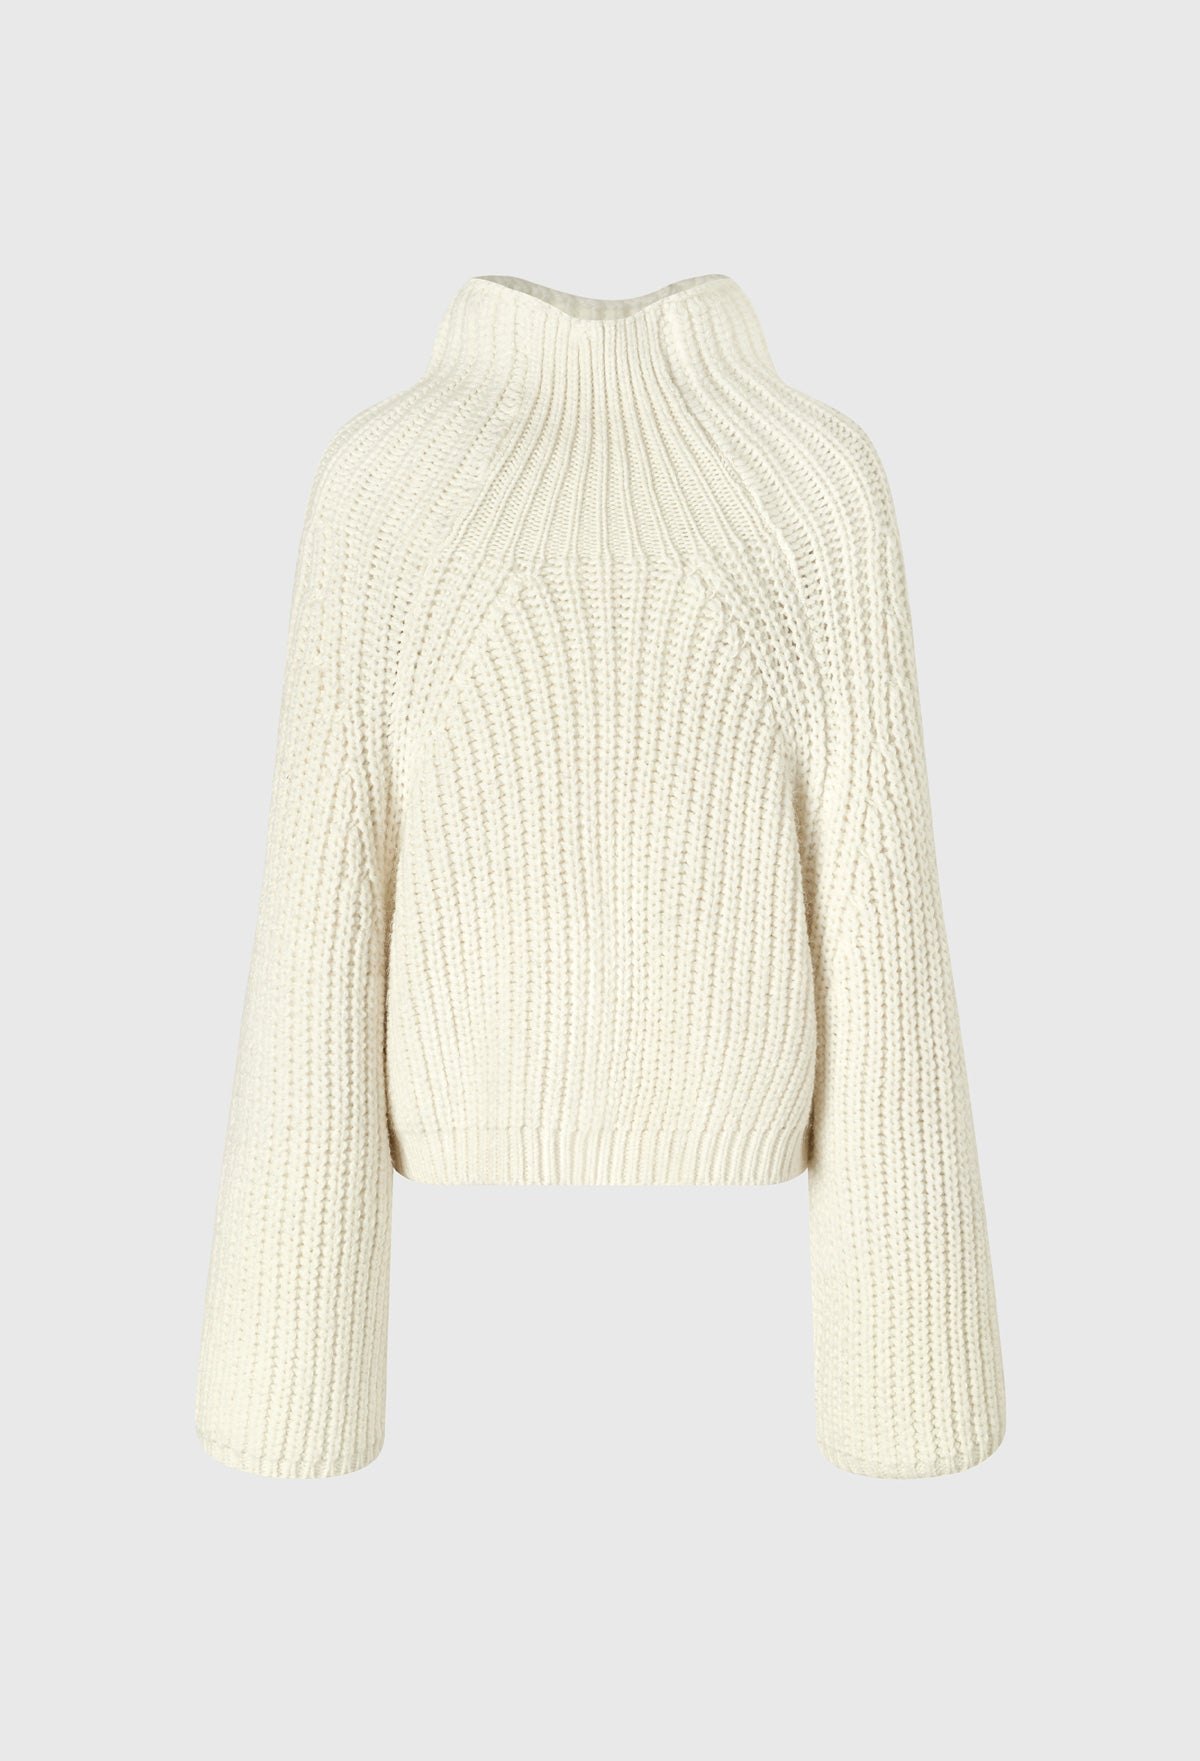 Slouchy High-neck Sweater In Ivory